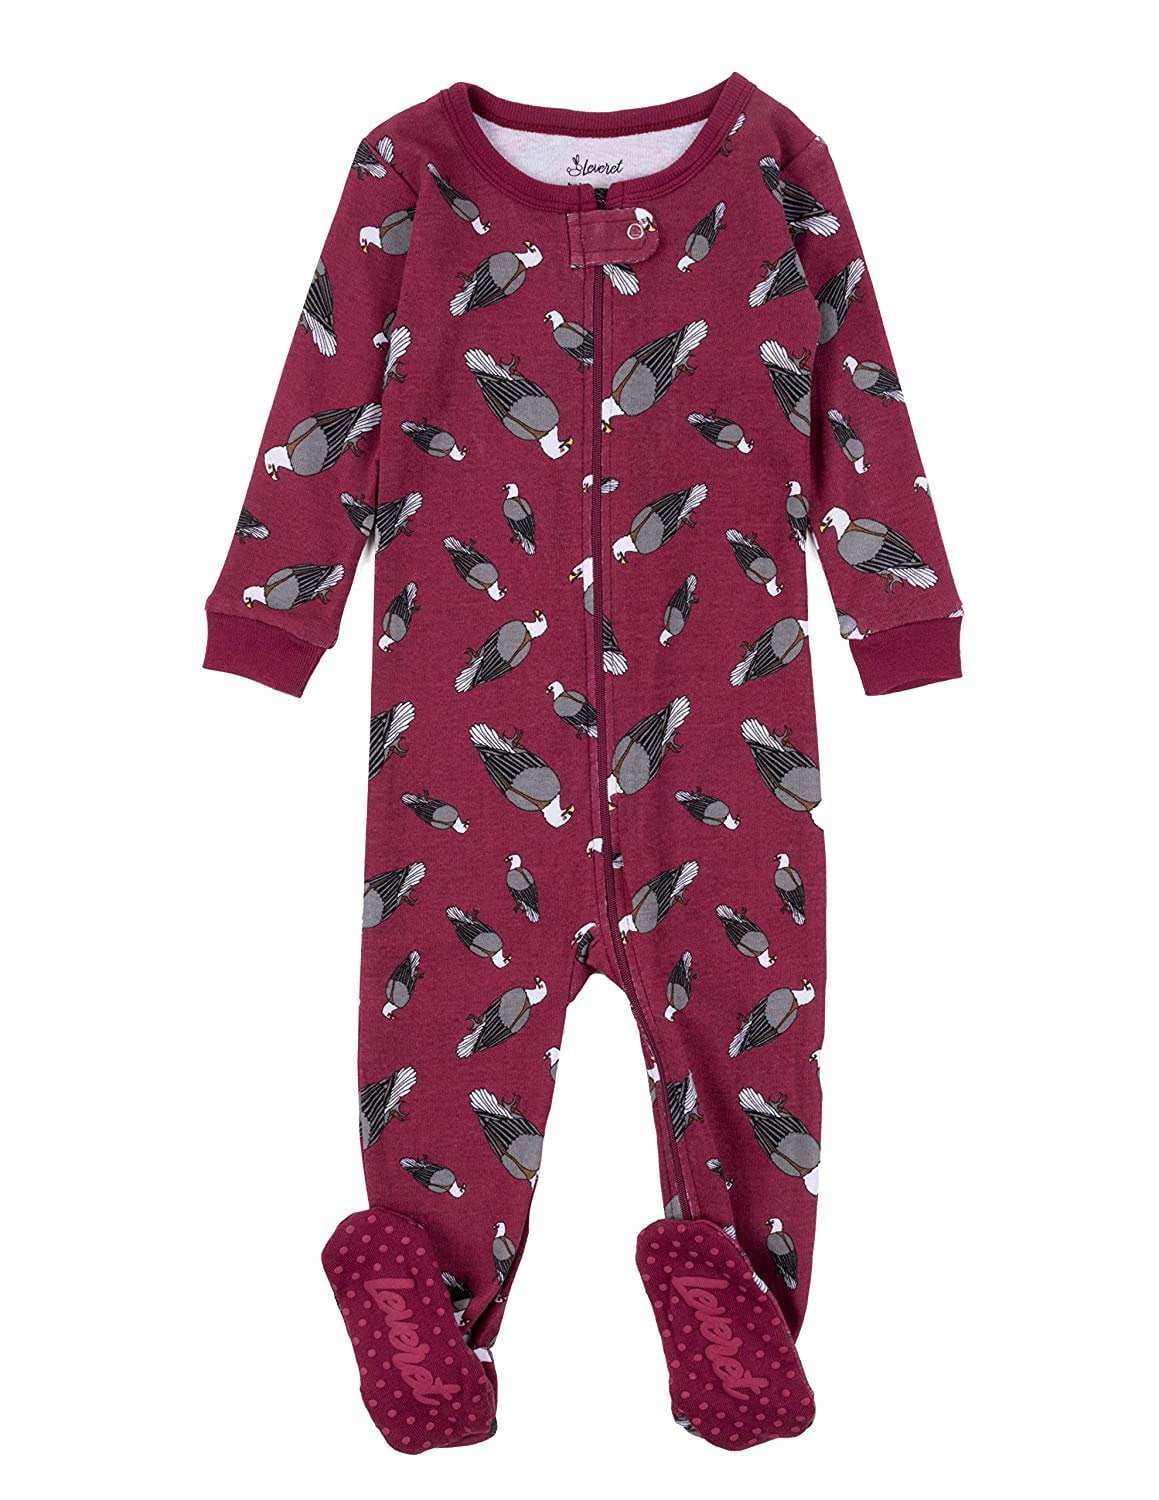 Leveret Kids & Toddler Boys Girls Footed Pajamas 100% Cotton Moon Size 12-18 Months 